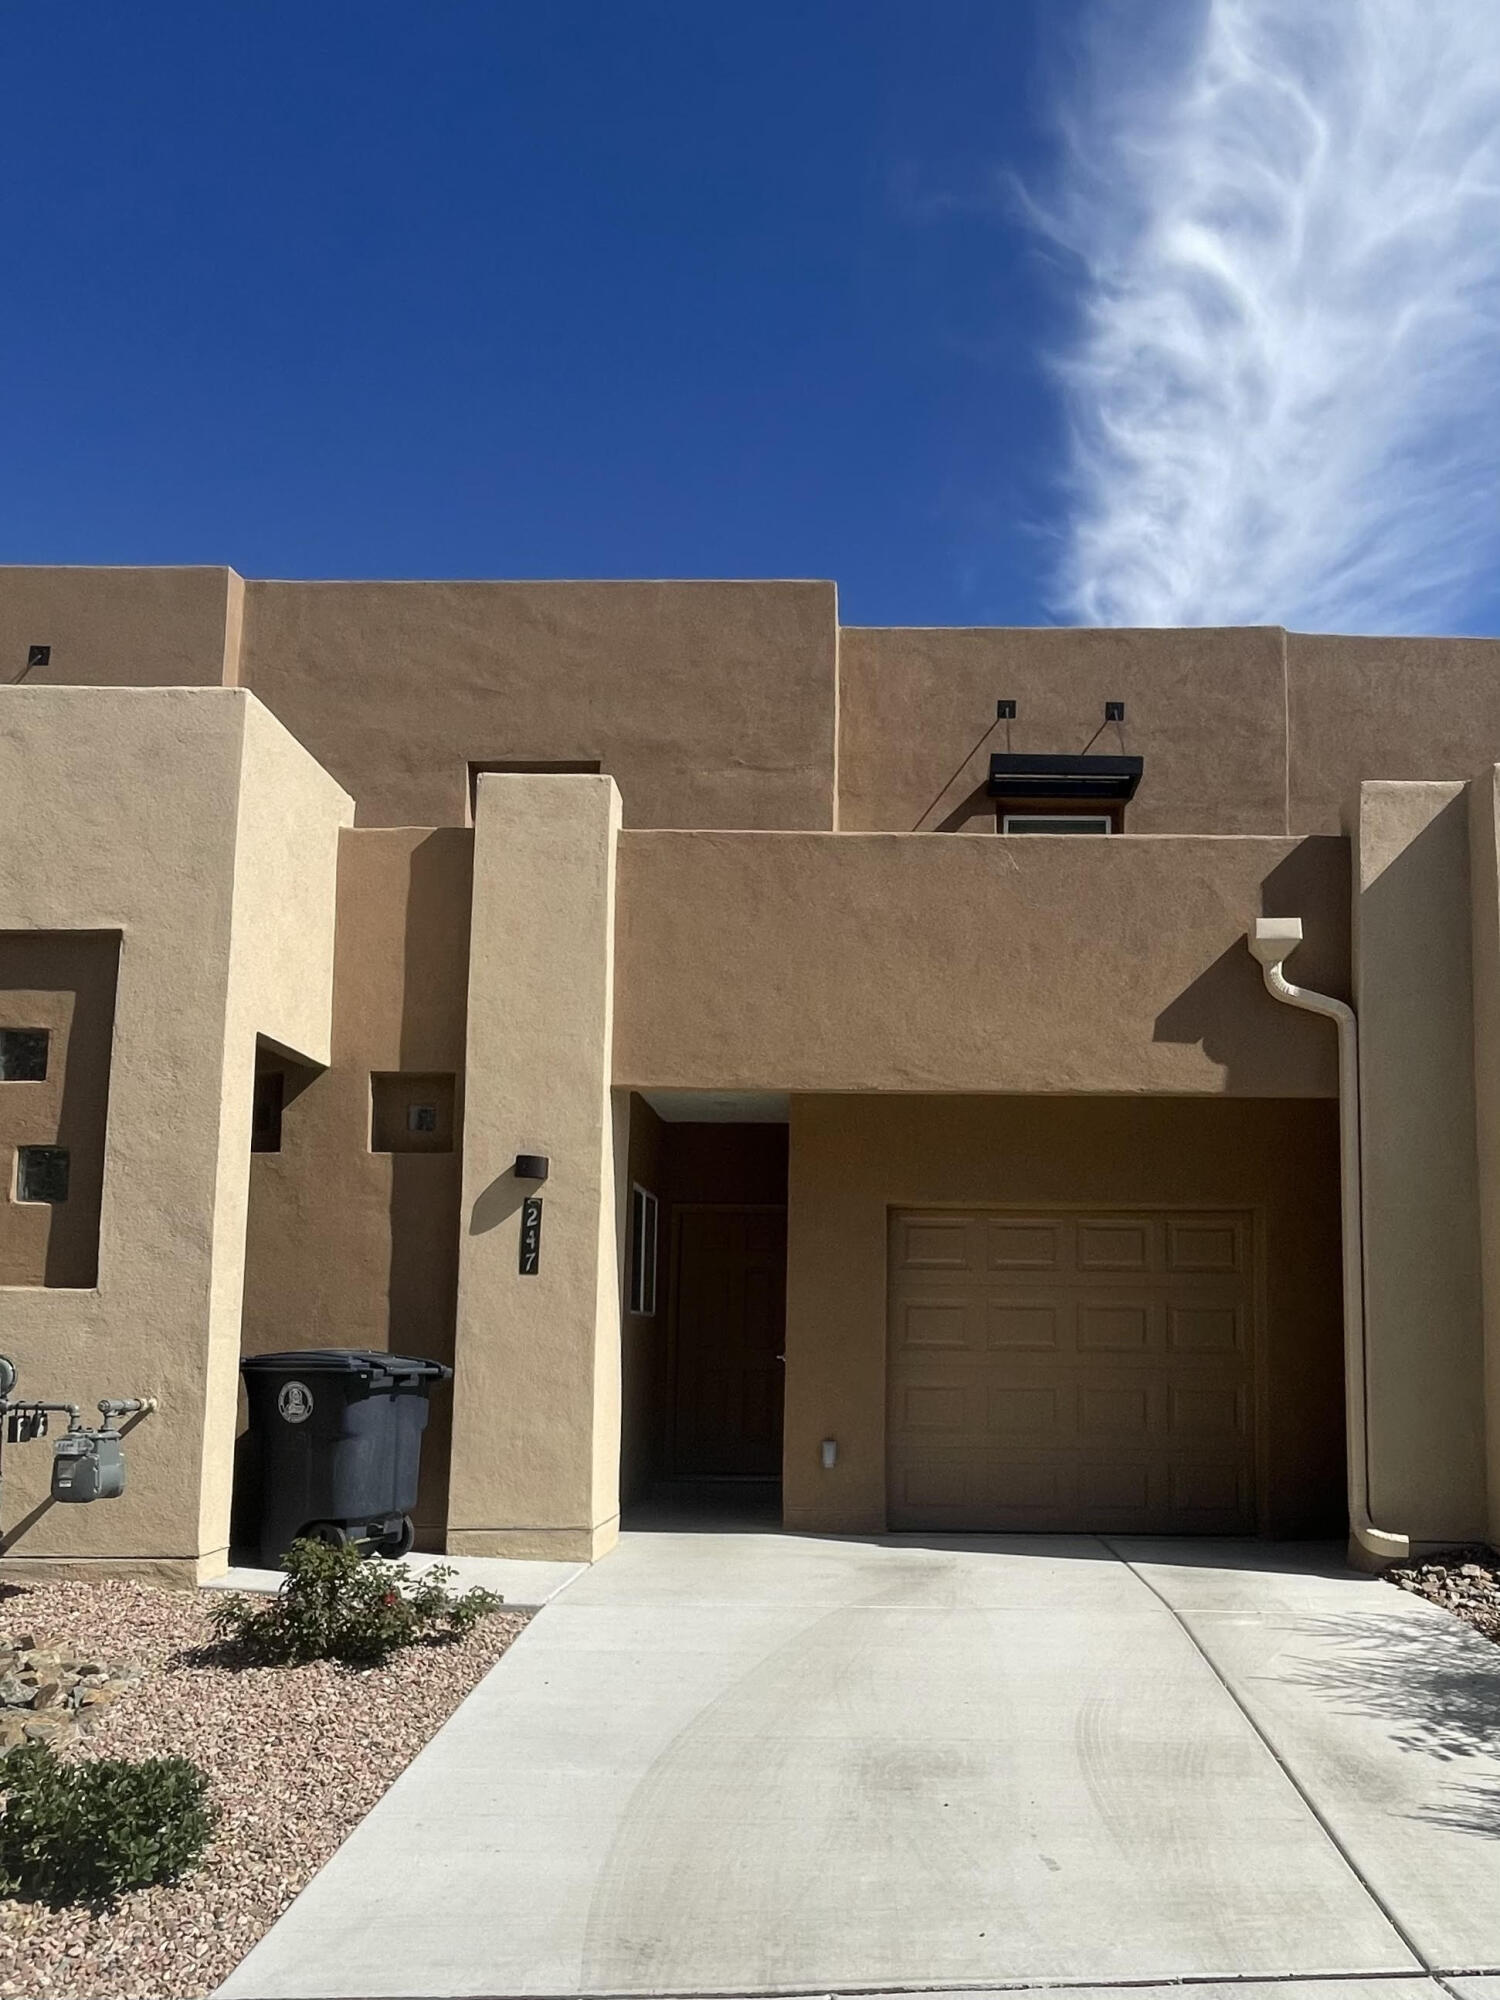 247 San Clemente Avenue NW, Albuquerque, New Mexico 87107, 3 Bedrooms Bedrooms, ,2 BathroomsBathrooms,Residential,For Sale,247 San Clemente Avenue NW,1054471